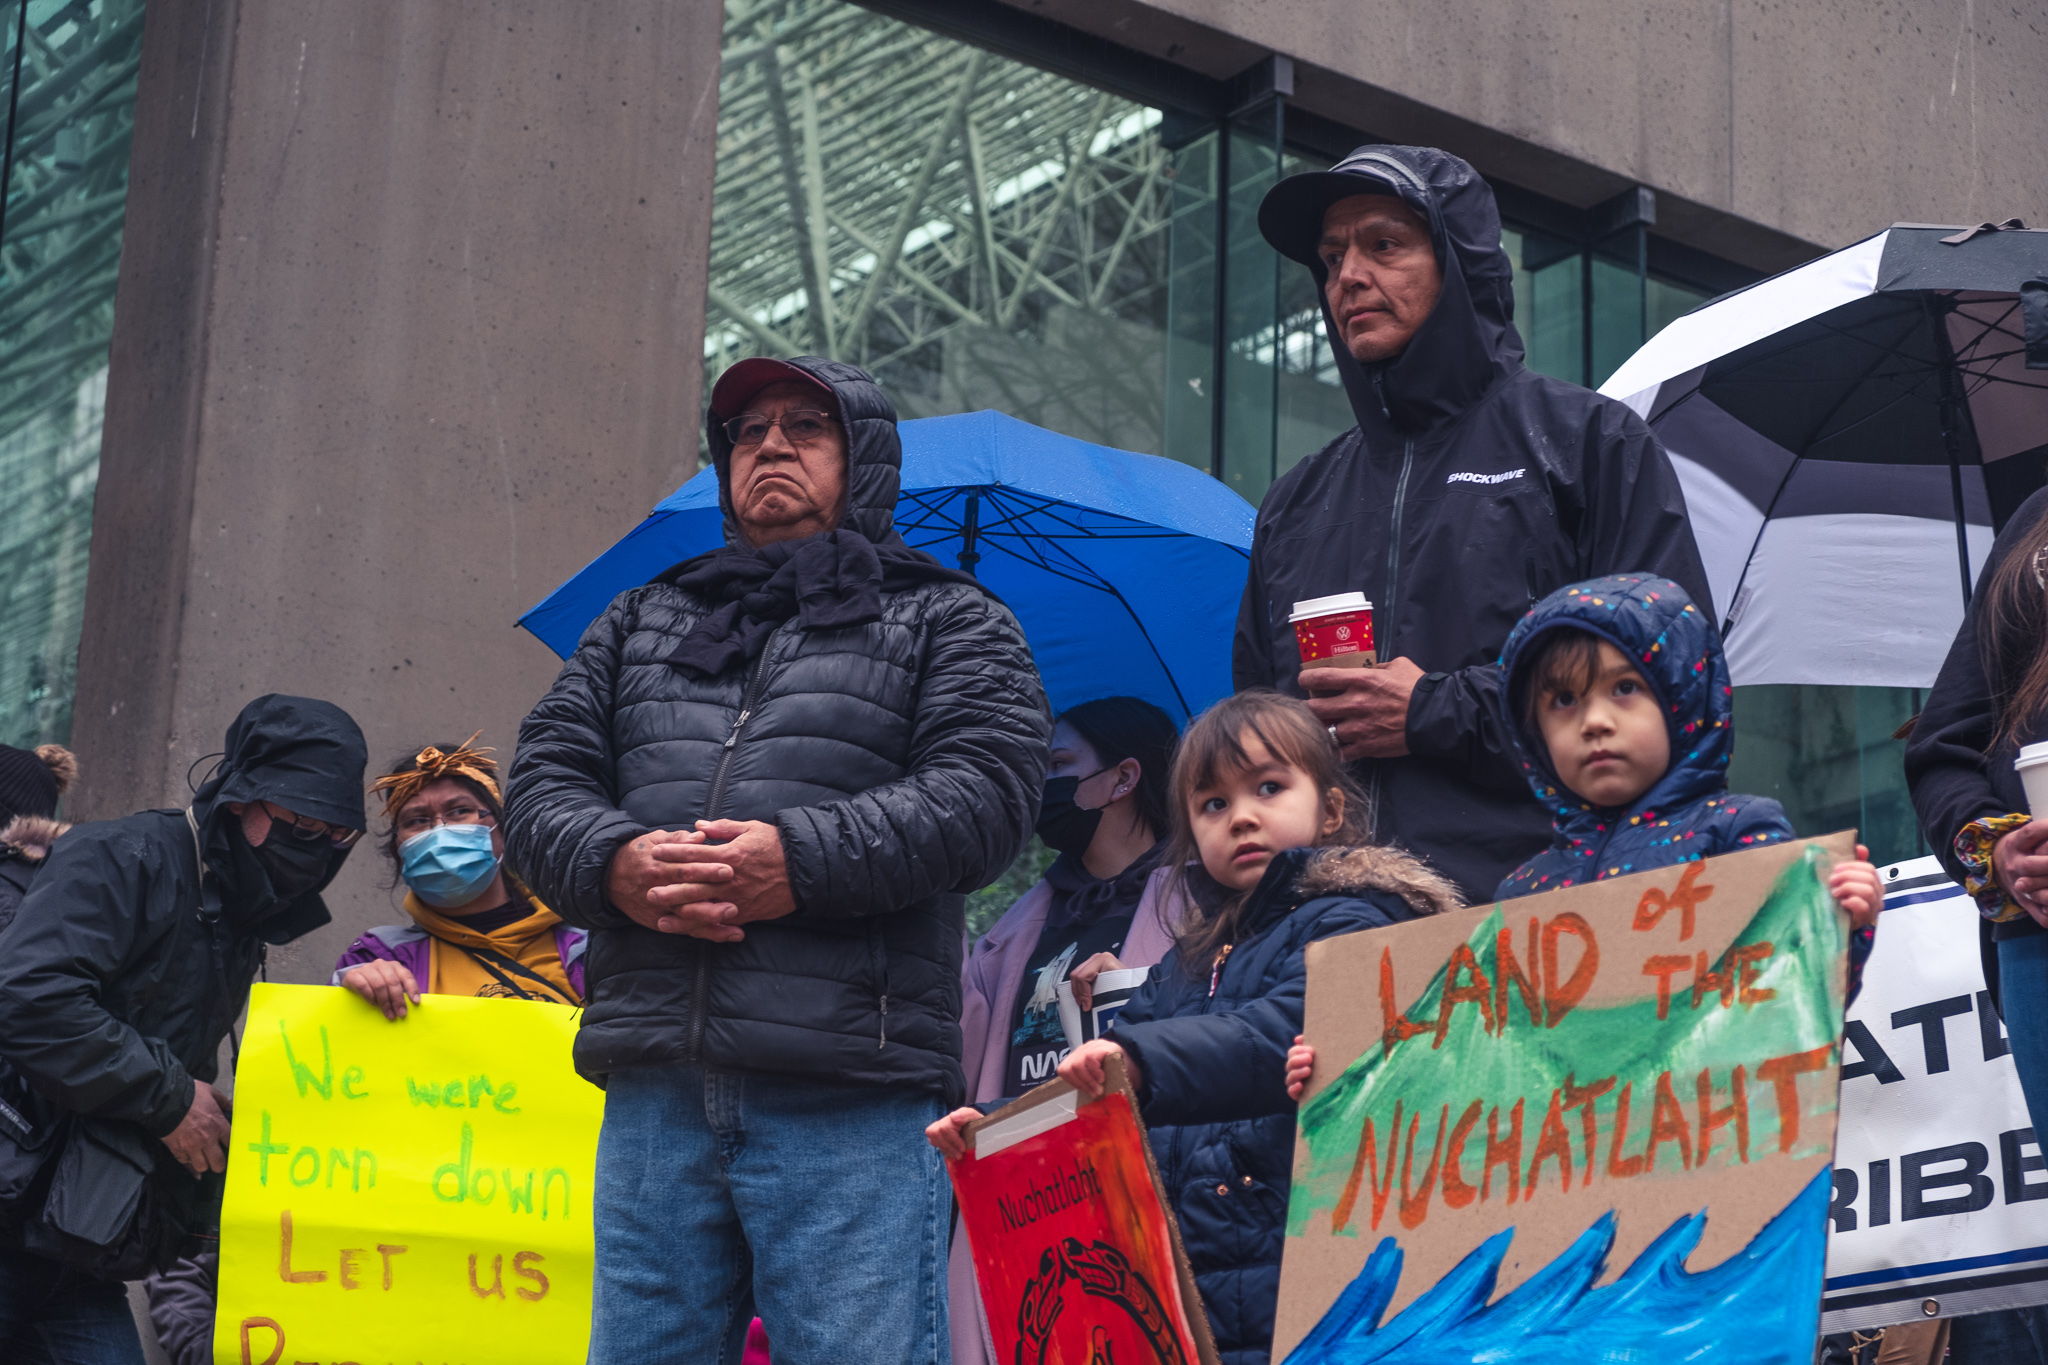 Members of Nuchatlaht Nation stand in the rain holding brightly coloured signs that say "WE WERE TORN DOWN" and "LAND OF THE NUCHATLAHT". End of image description.